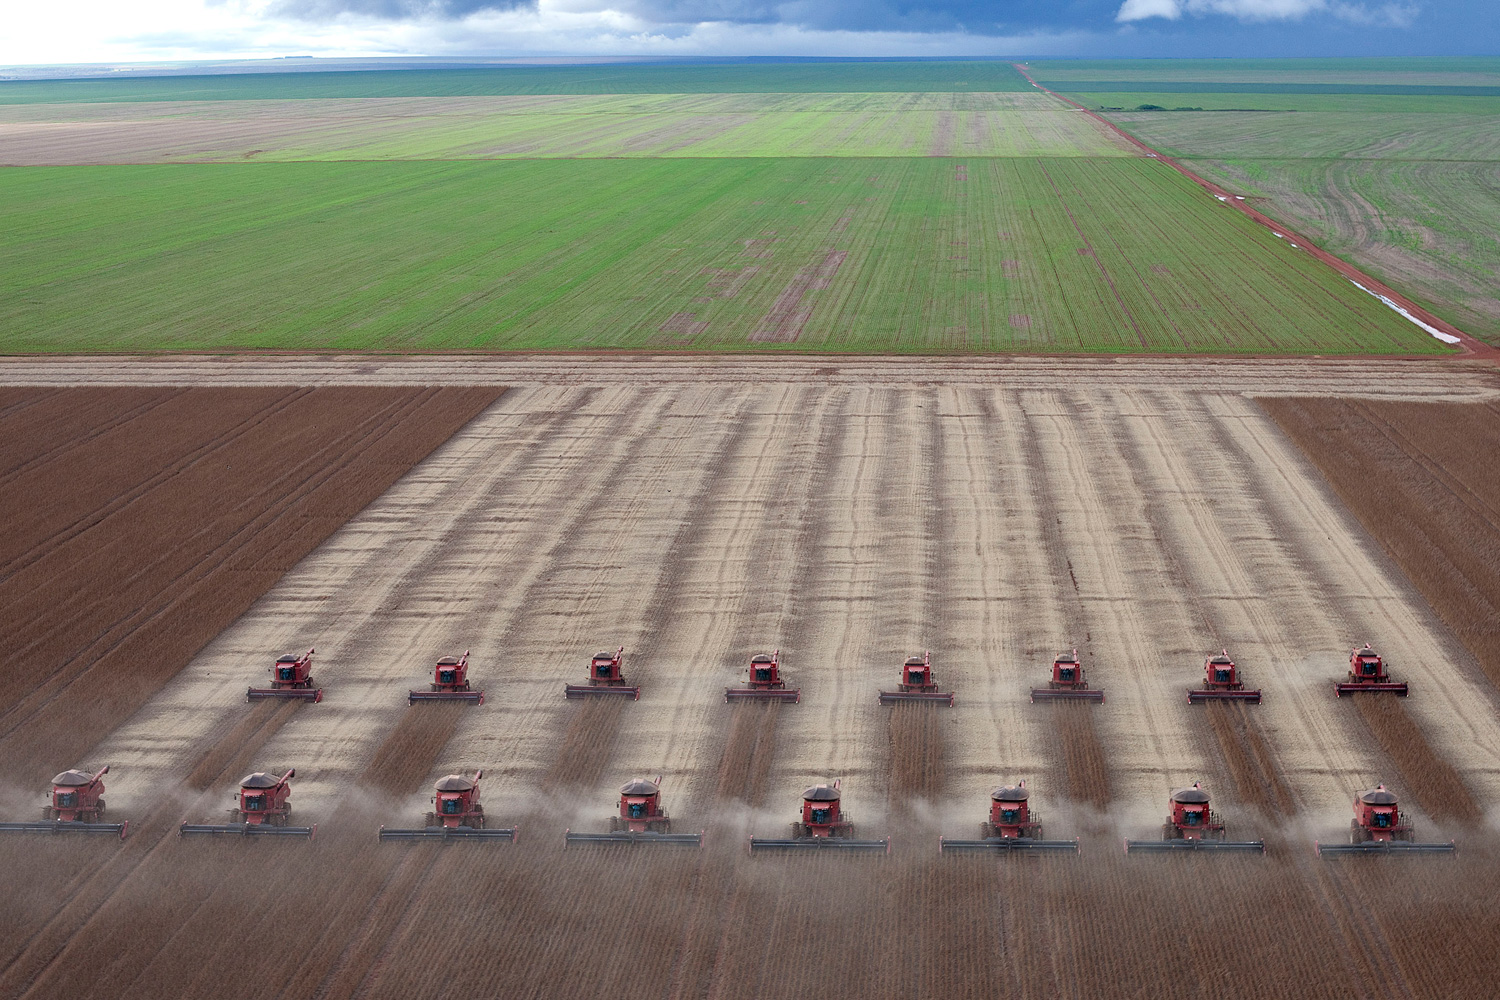 March 27, 2012. Workers use combines to harvest soybeans in Tangara da Serra, State of Mato Grosso, Brazil.